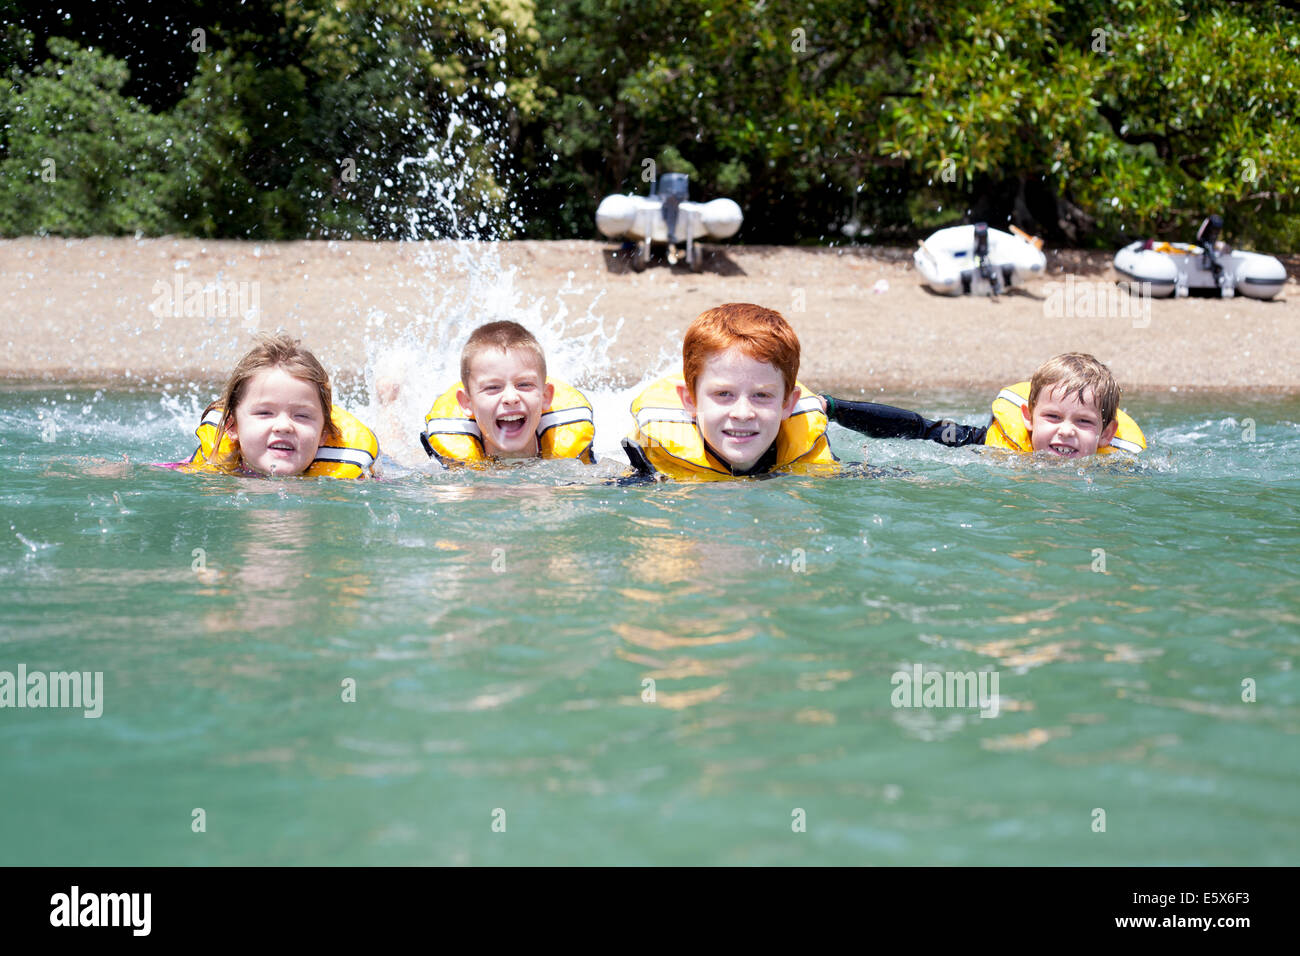 Brothers and sister in a row swimming in sea Stock Photo